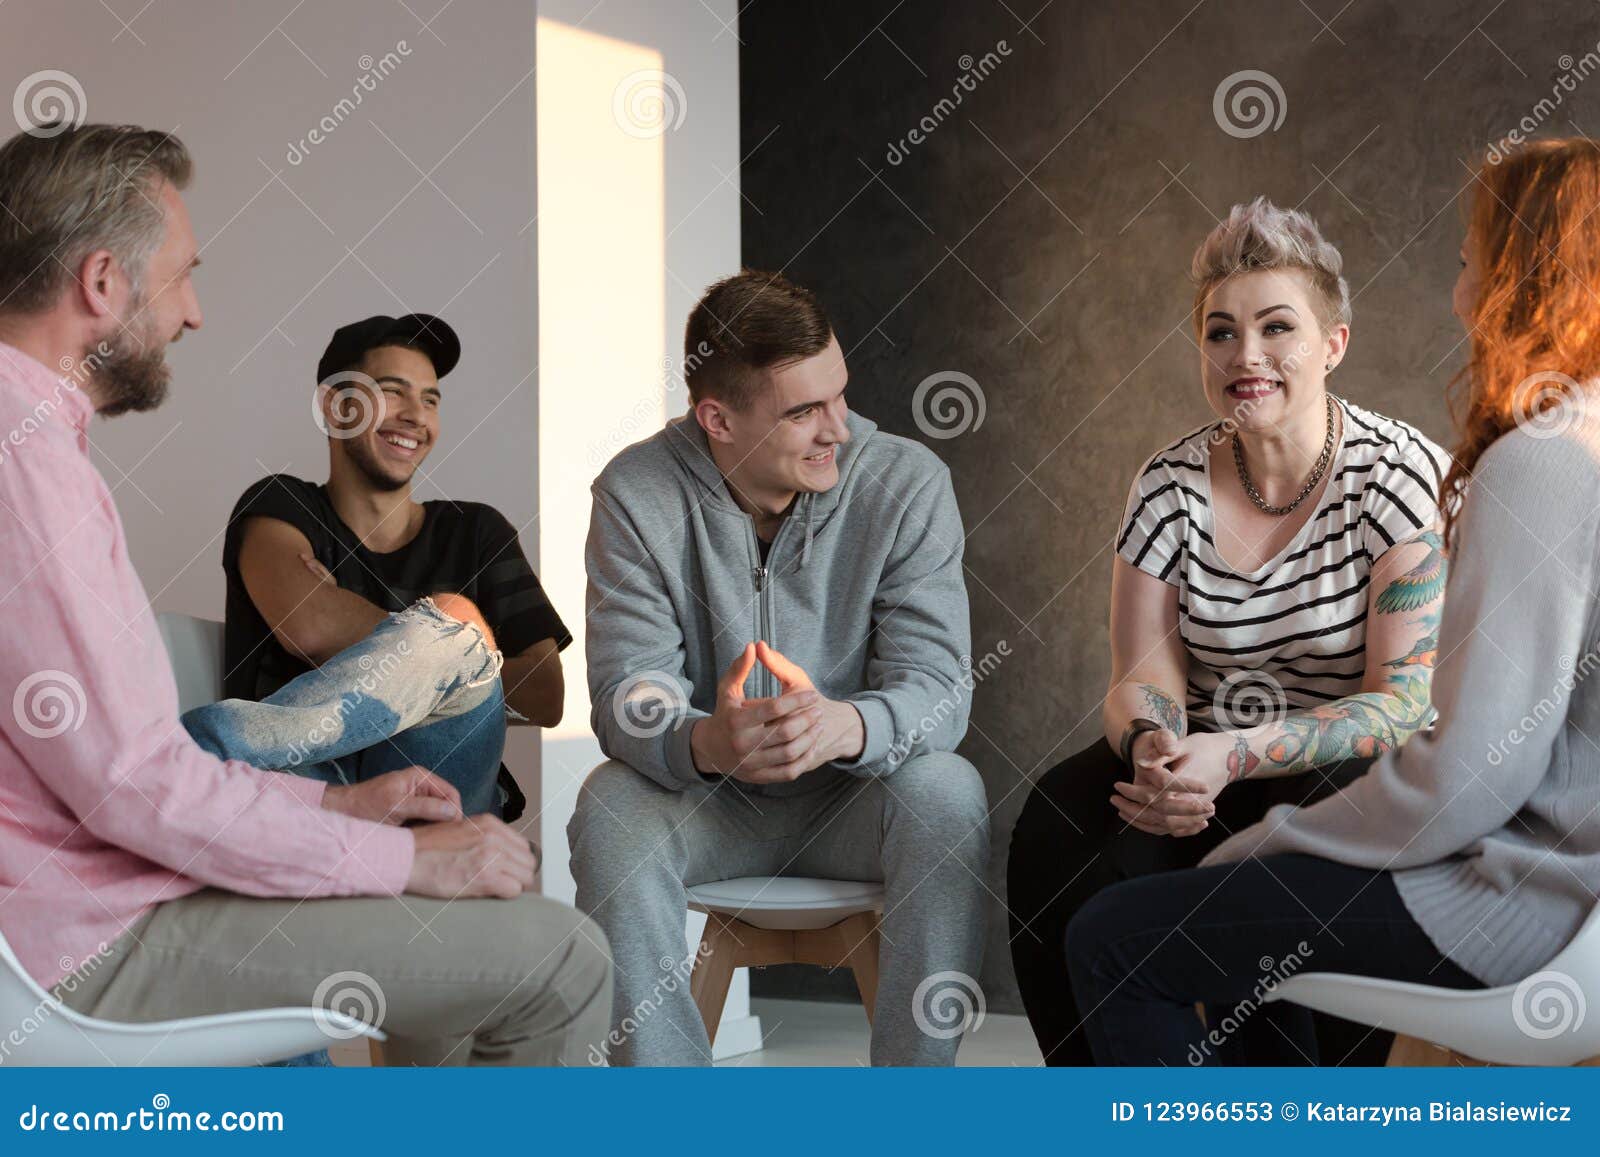 teenagers laughing during a group counseling session for youth